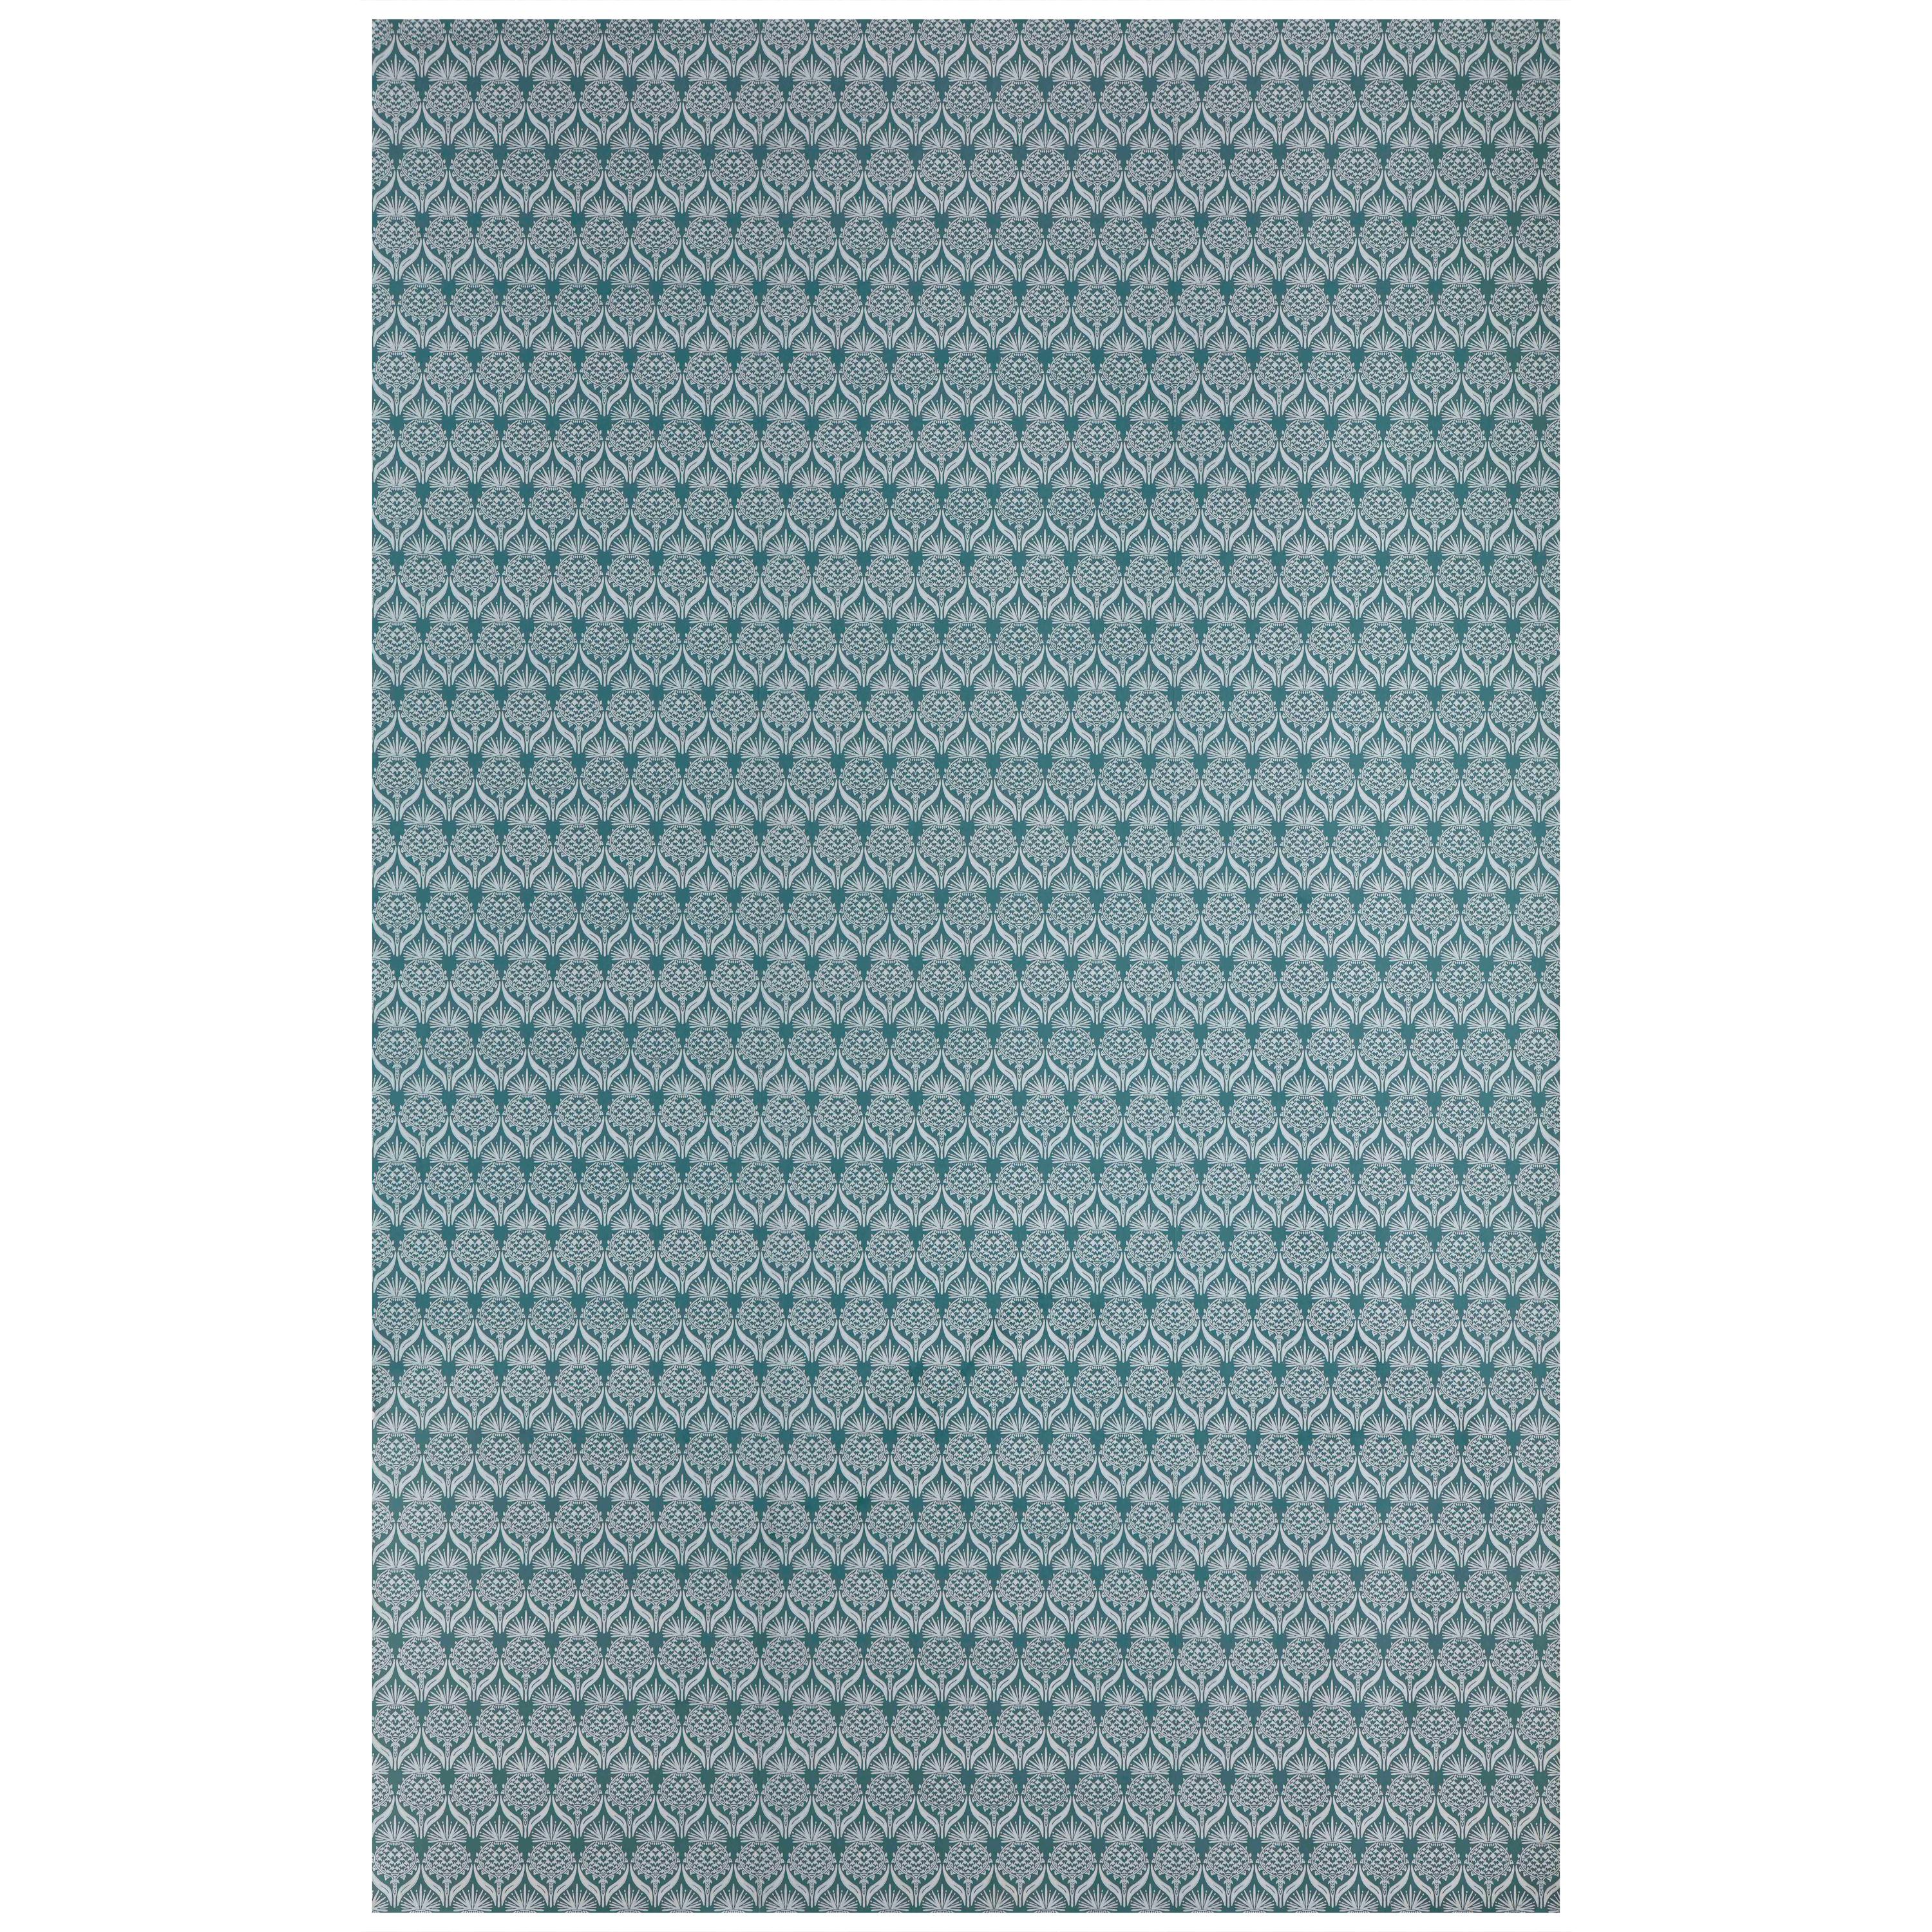 'Artichoke Thistle' Contemporary, Traditional Wallpaper in Teal For Sale